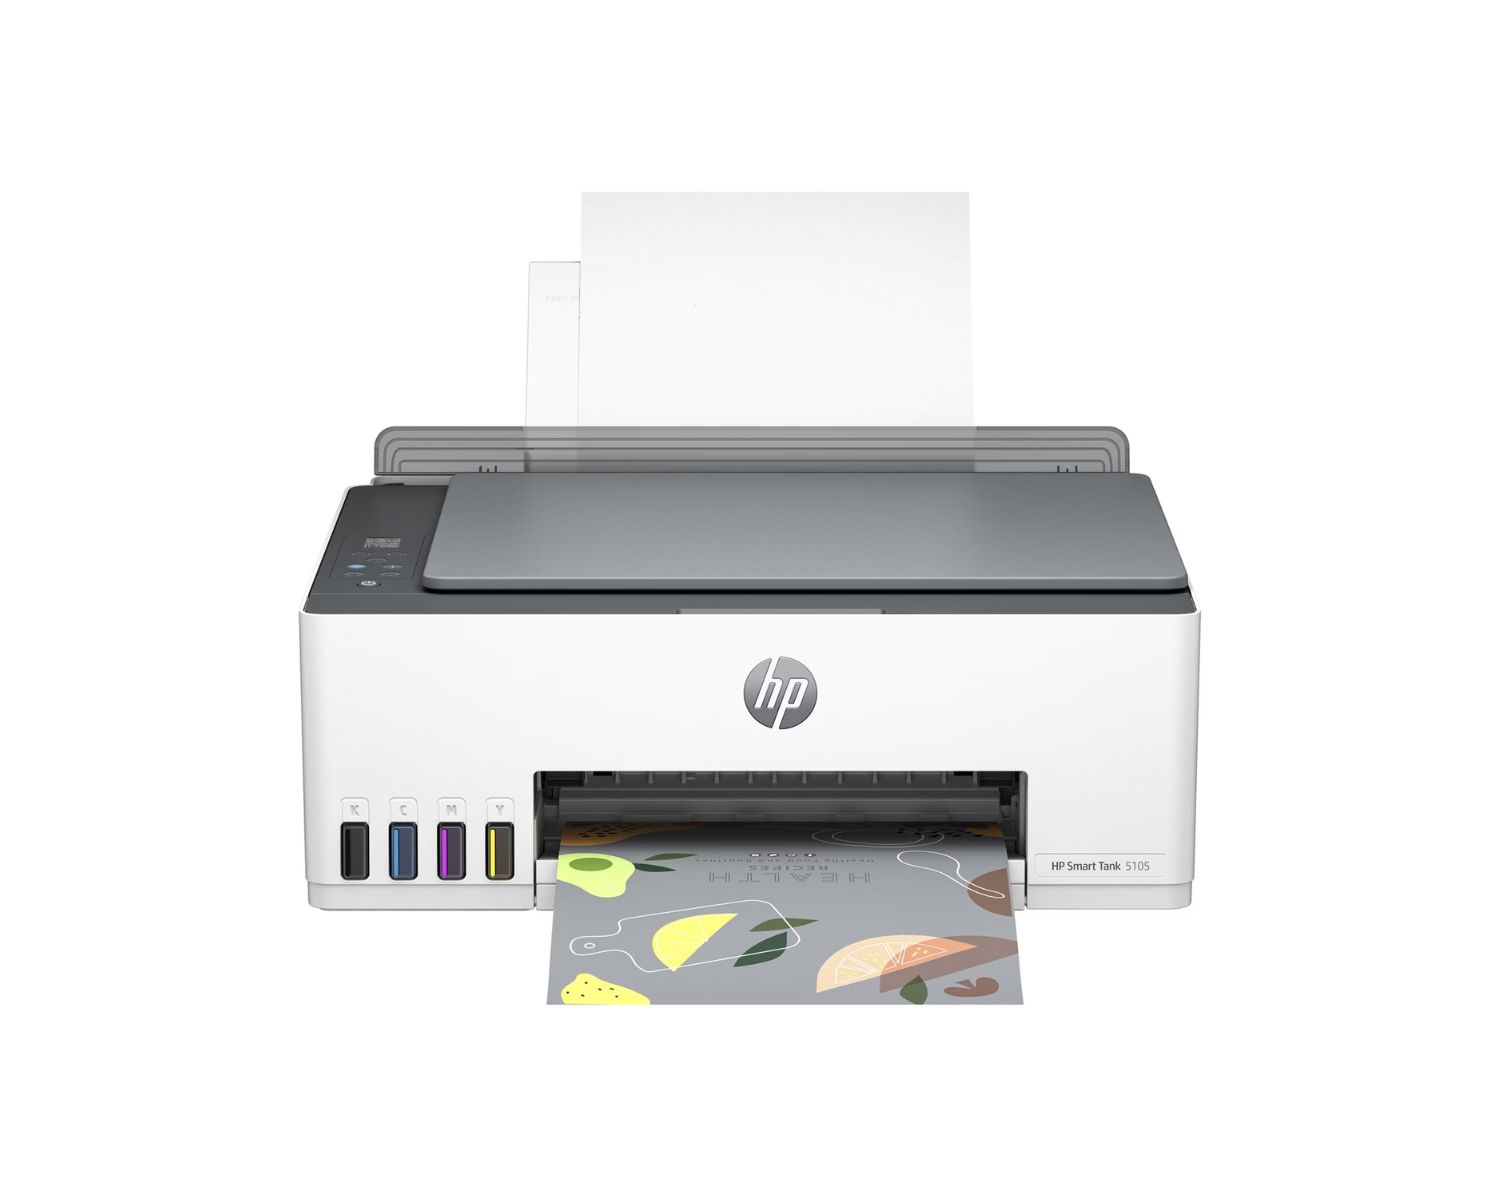 How To Disable Firmware Update On HP Printer